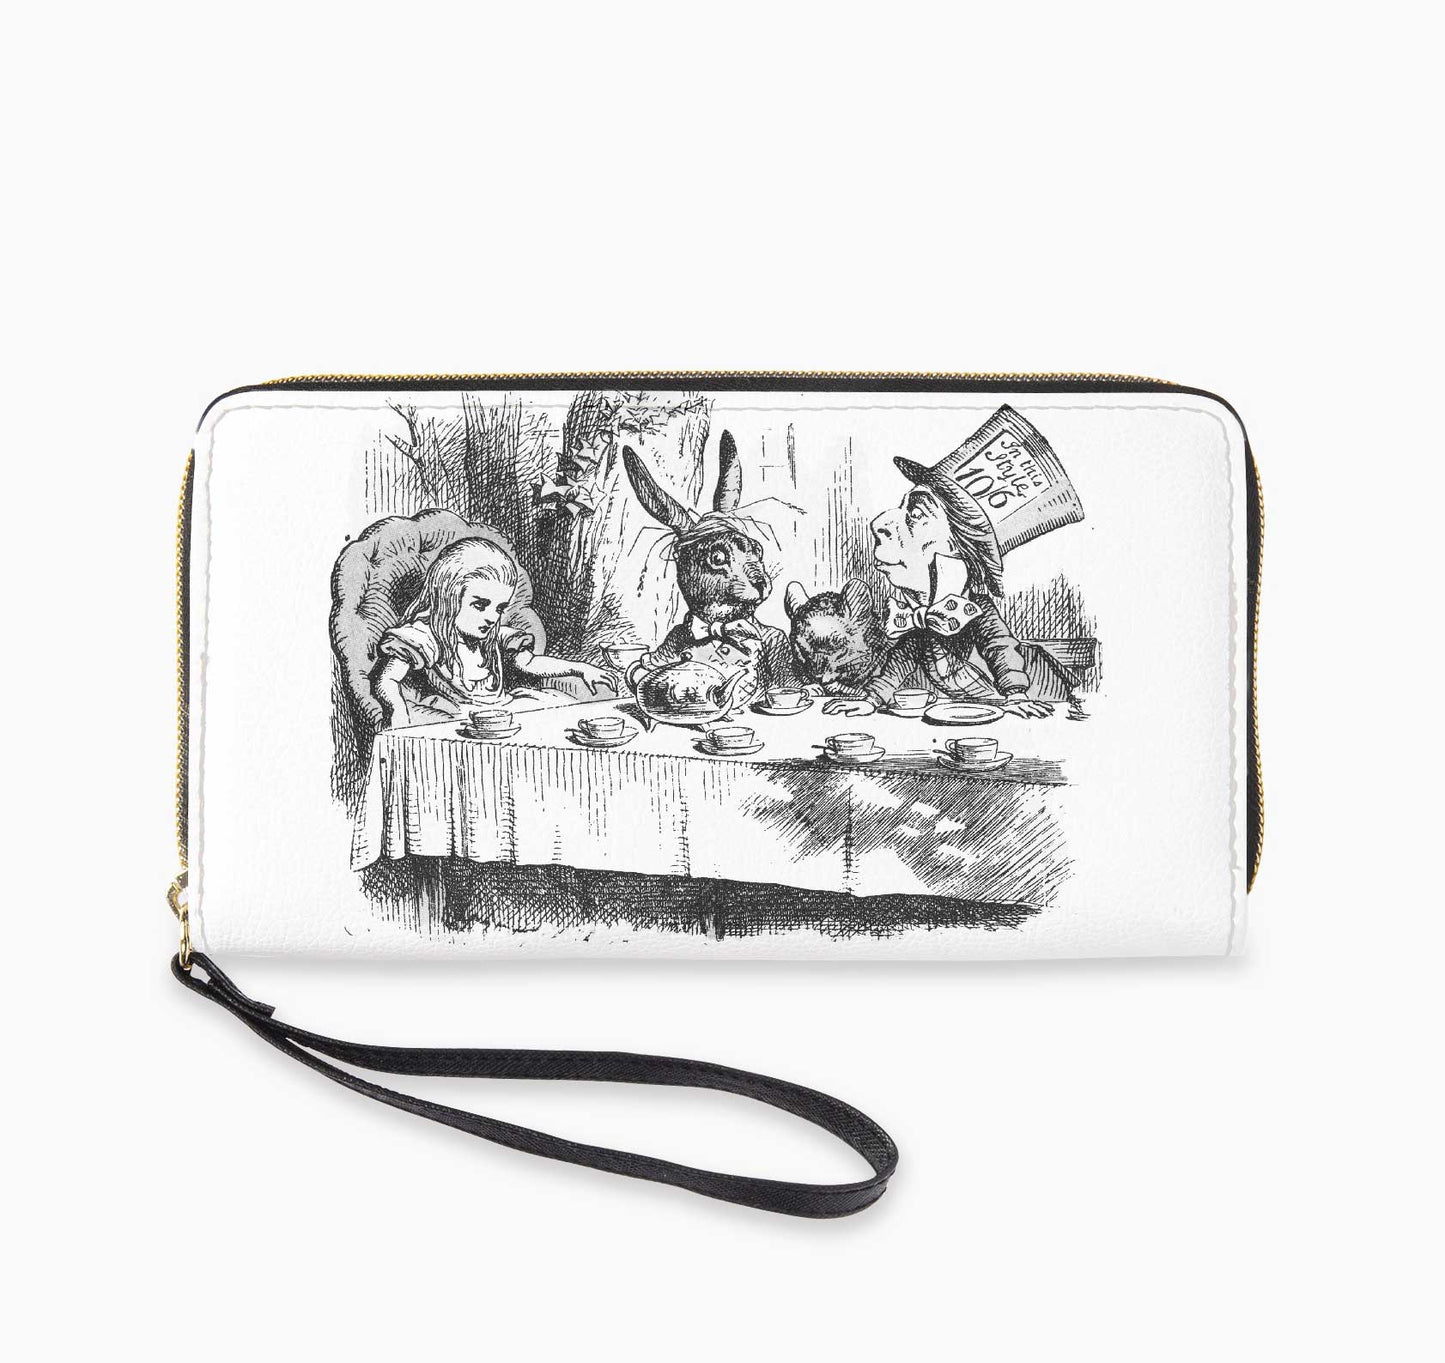 Vintage Alice Black and White Wrist Wallet - Mad Hatter Tea Party Purse (JPVINABW)